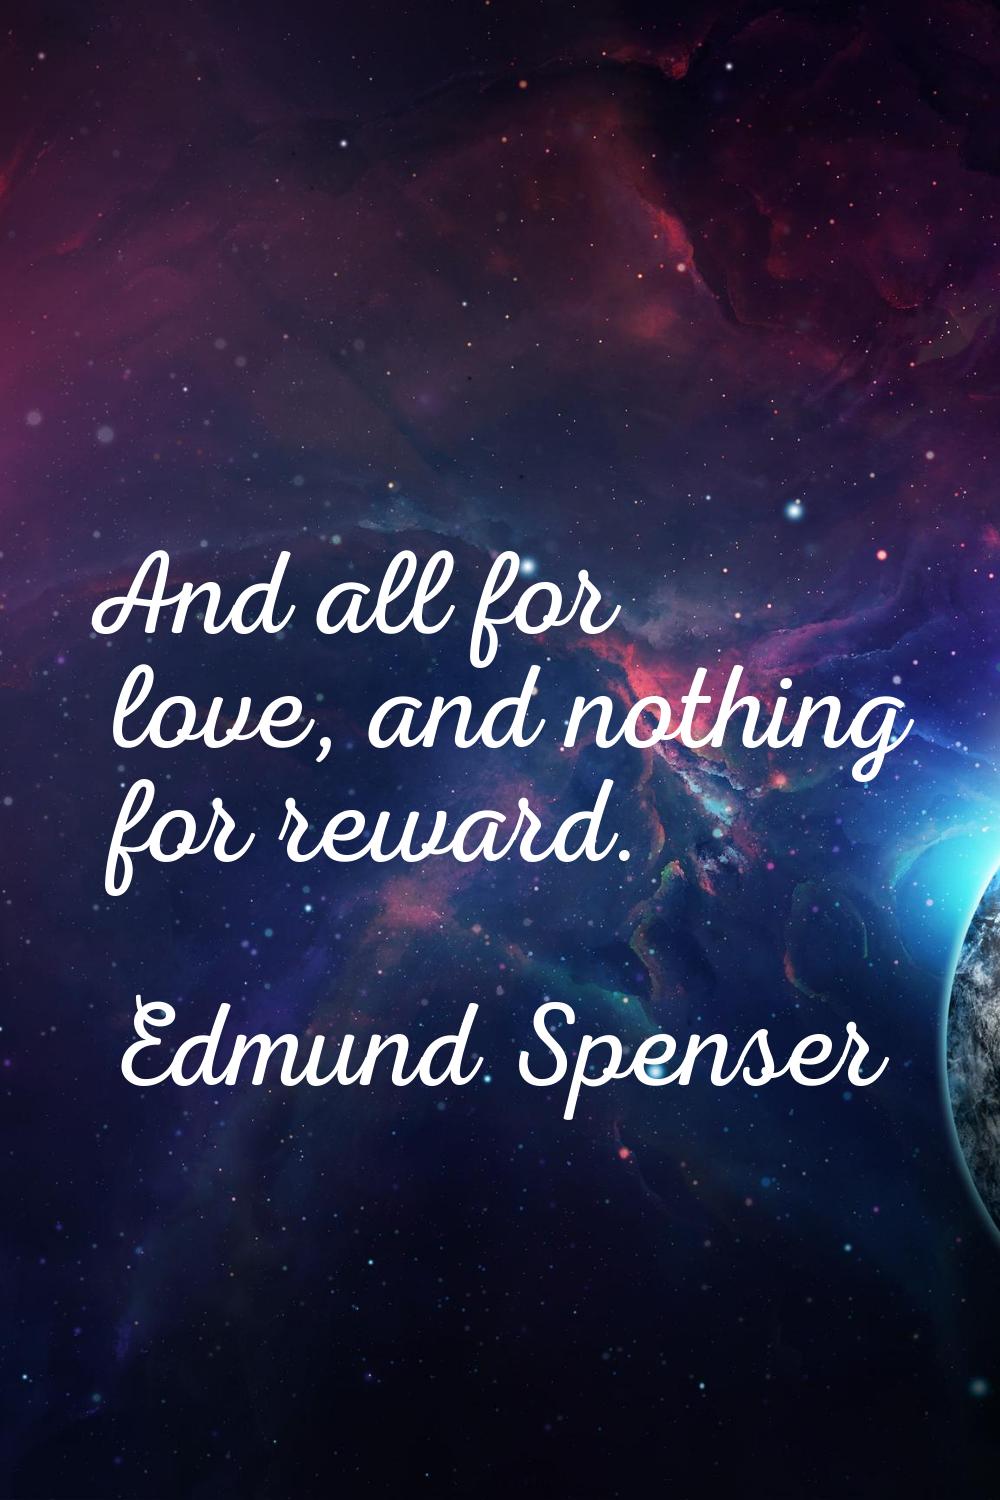 And all for love, and nothing for reward.